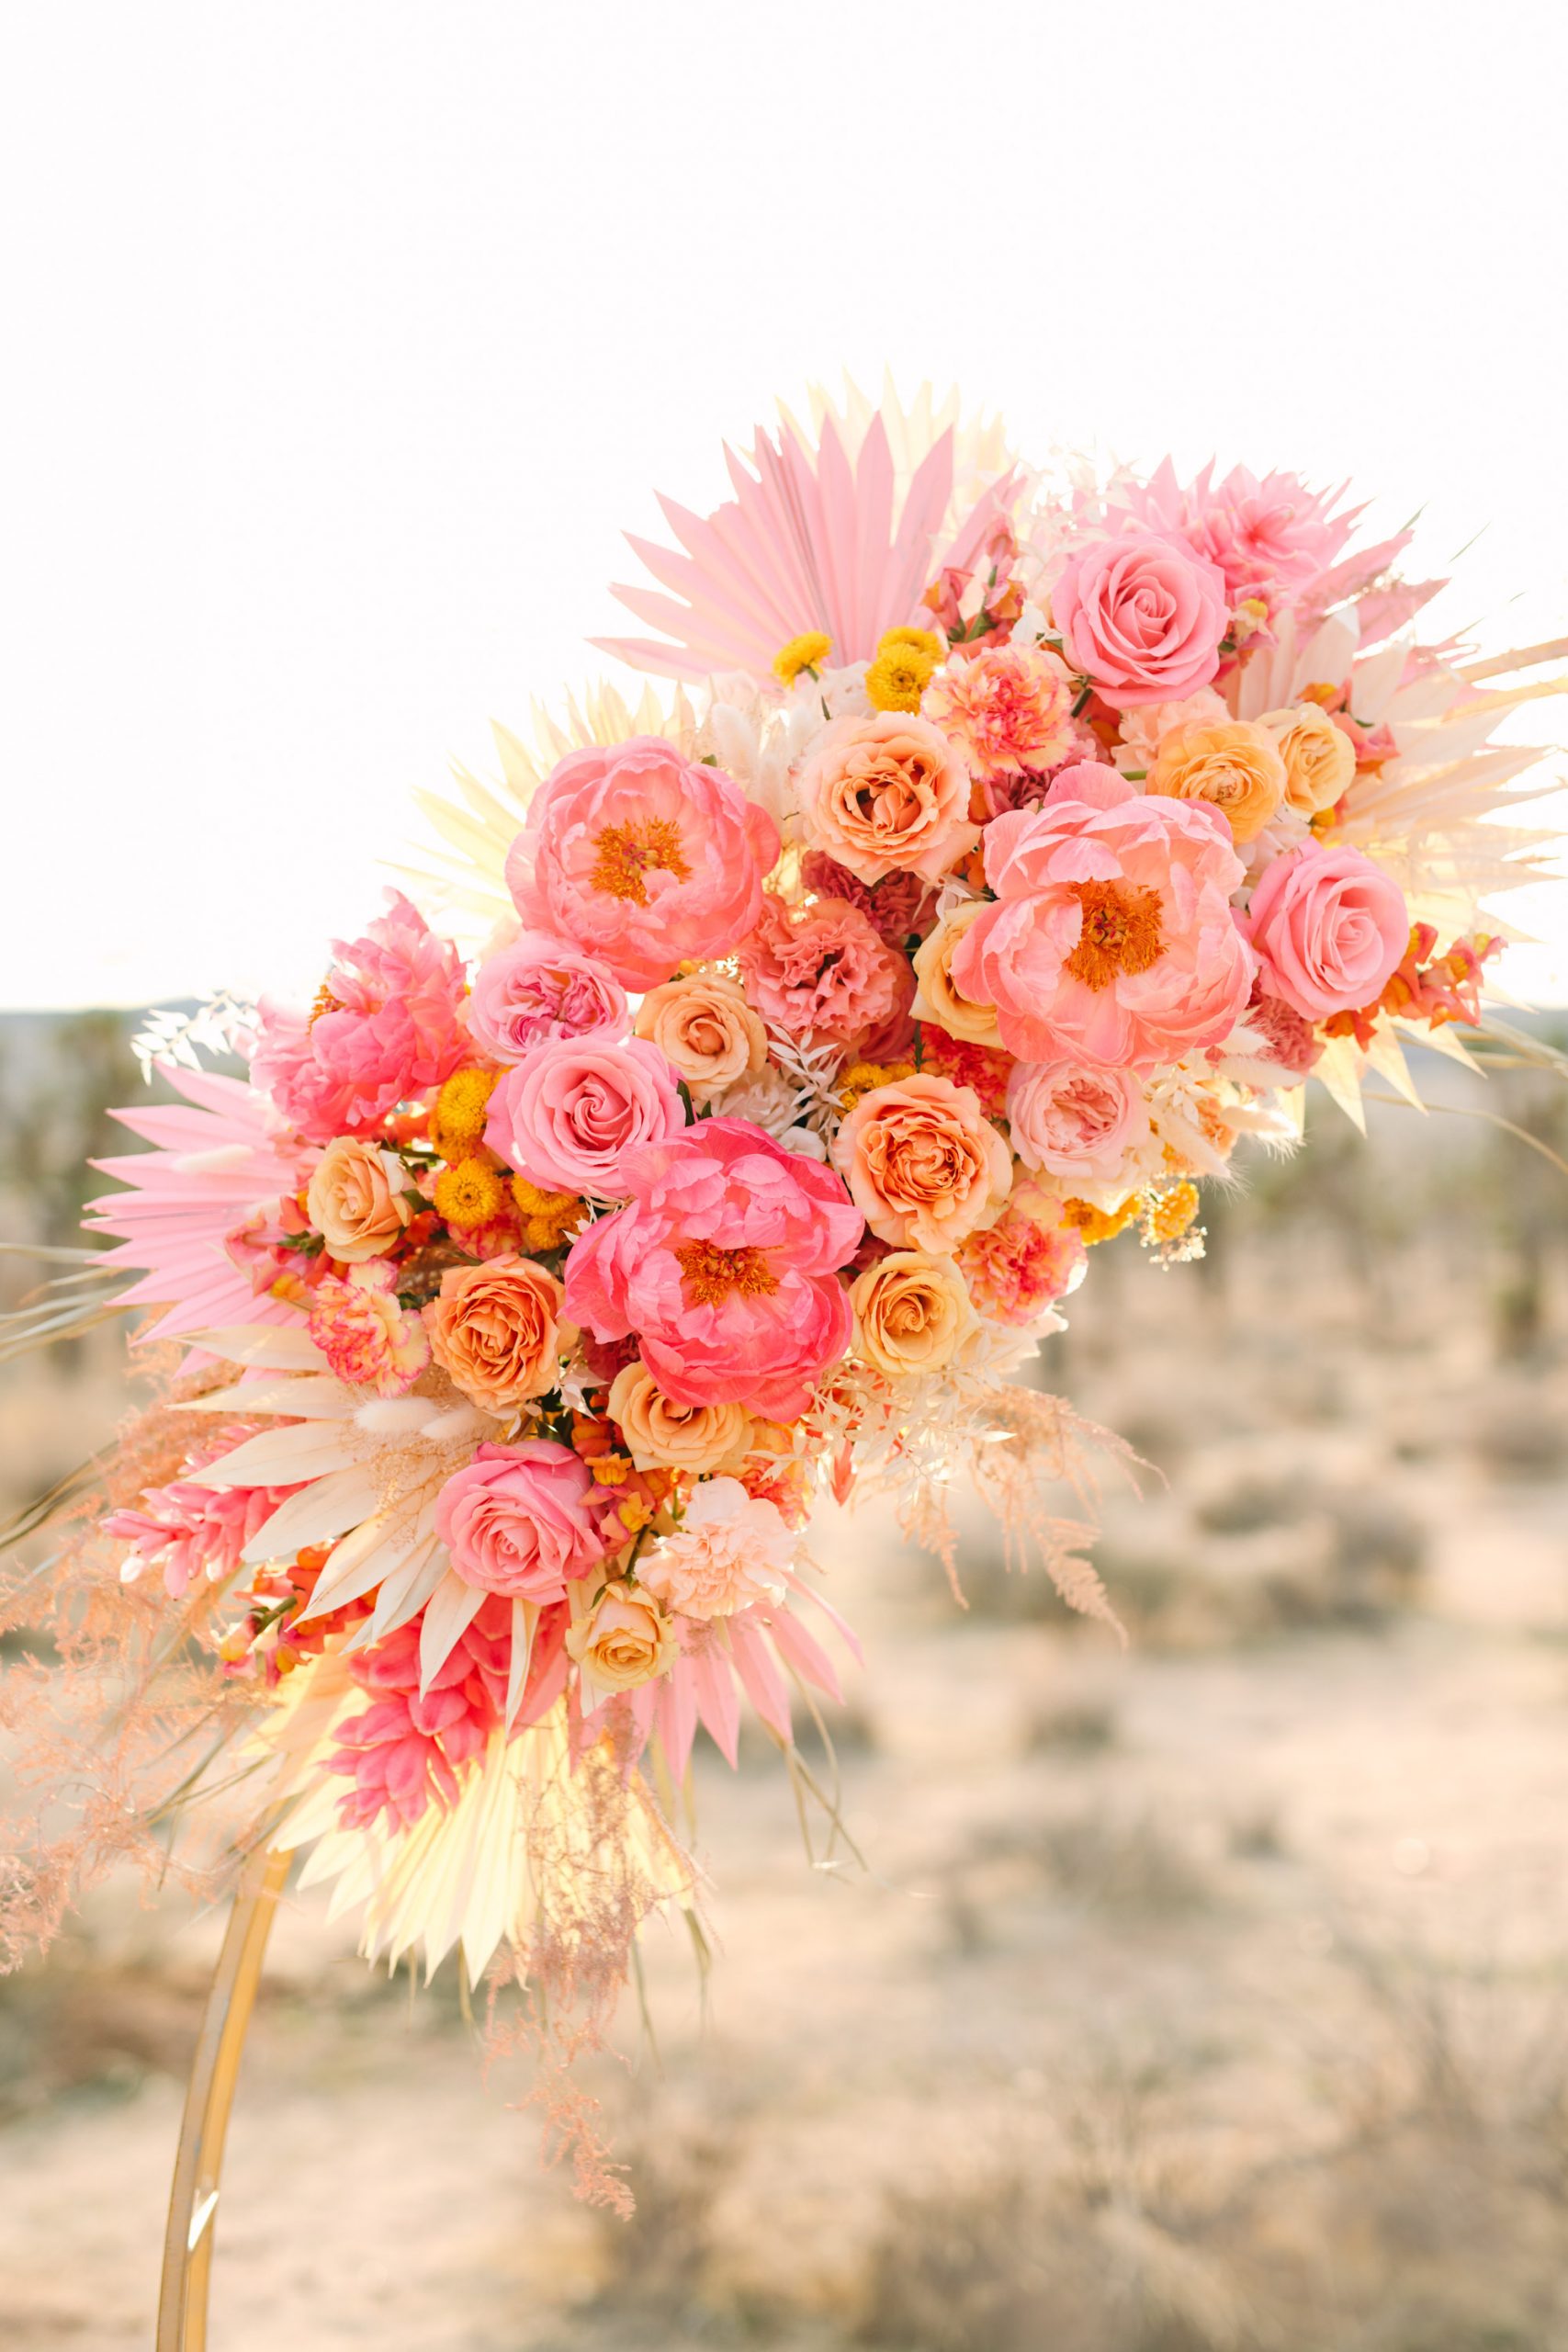 Pink peony and palm ceremony florals | Pink wedding dress Joshua Tree elopement featured on Green Wedding Shoes | Colorful desert wedding inspiration for fun-loving couples in Southern California #joshuatreewedding #joshuatreeelopement #pinkwedding #greenweddingshoes Source: Mary Costa Photography | Los Angeles